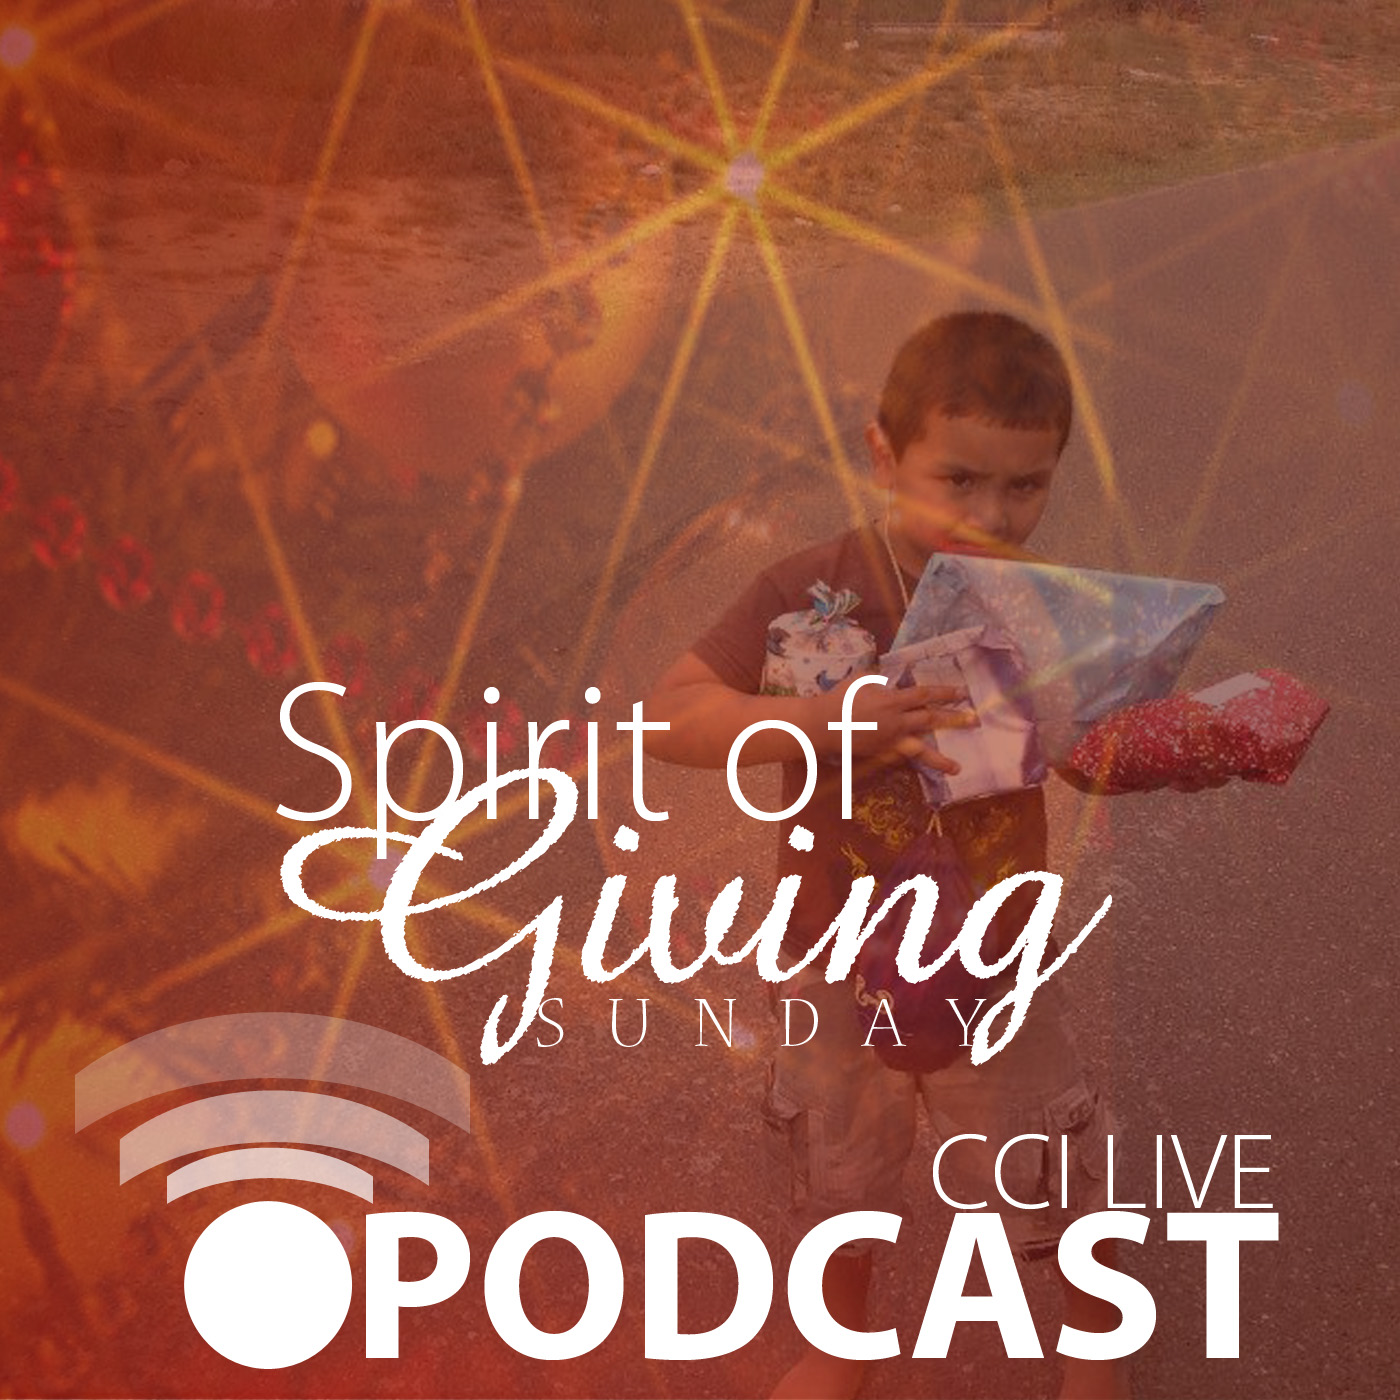 Spirit of Giving - Telling Our Story